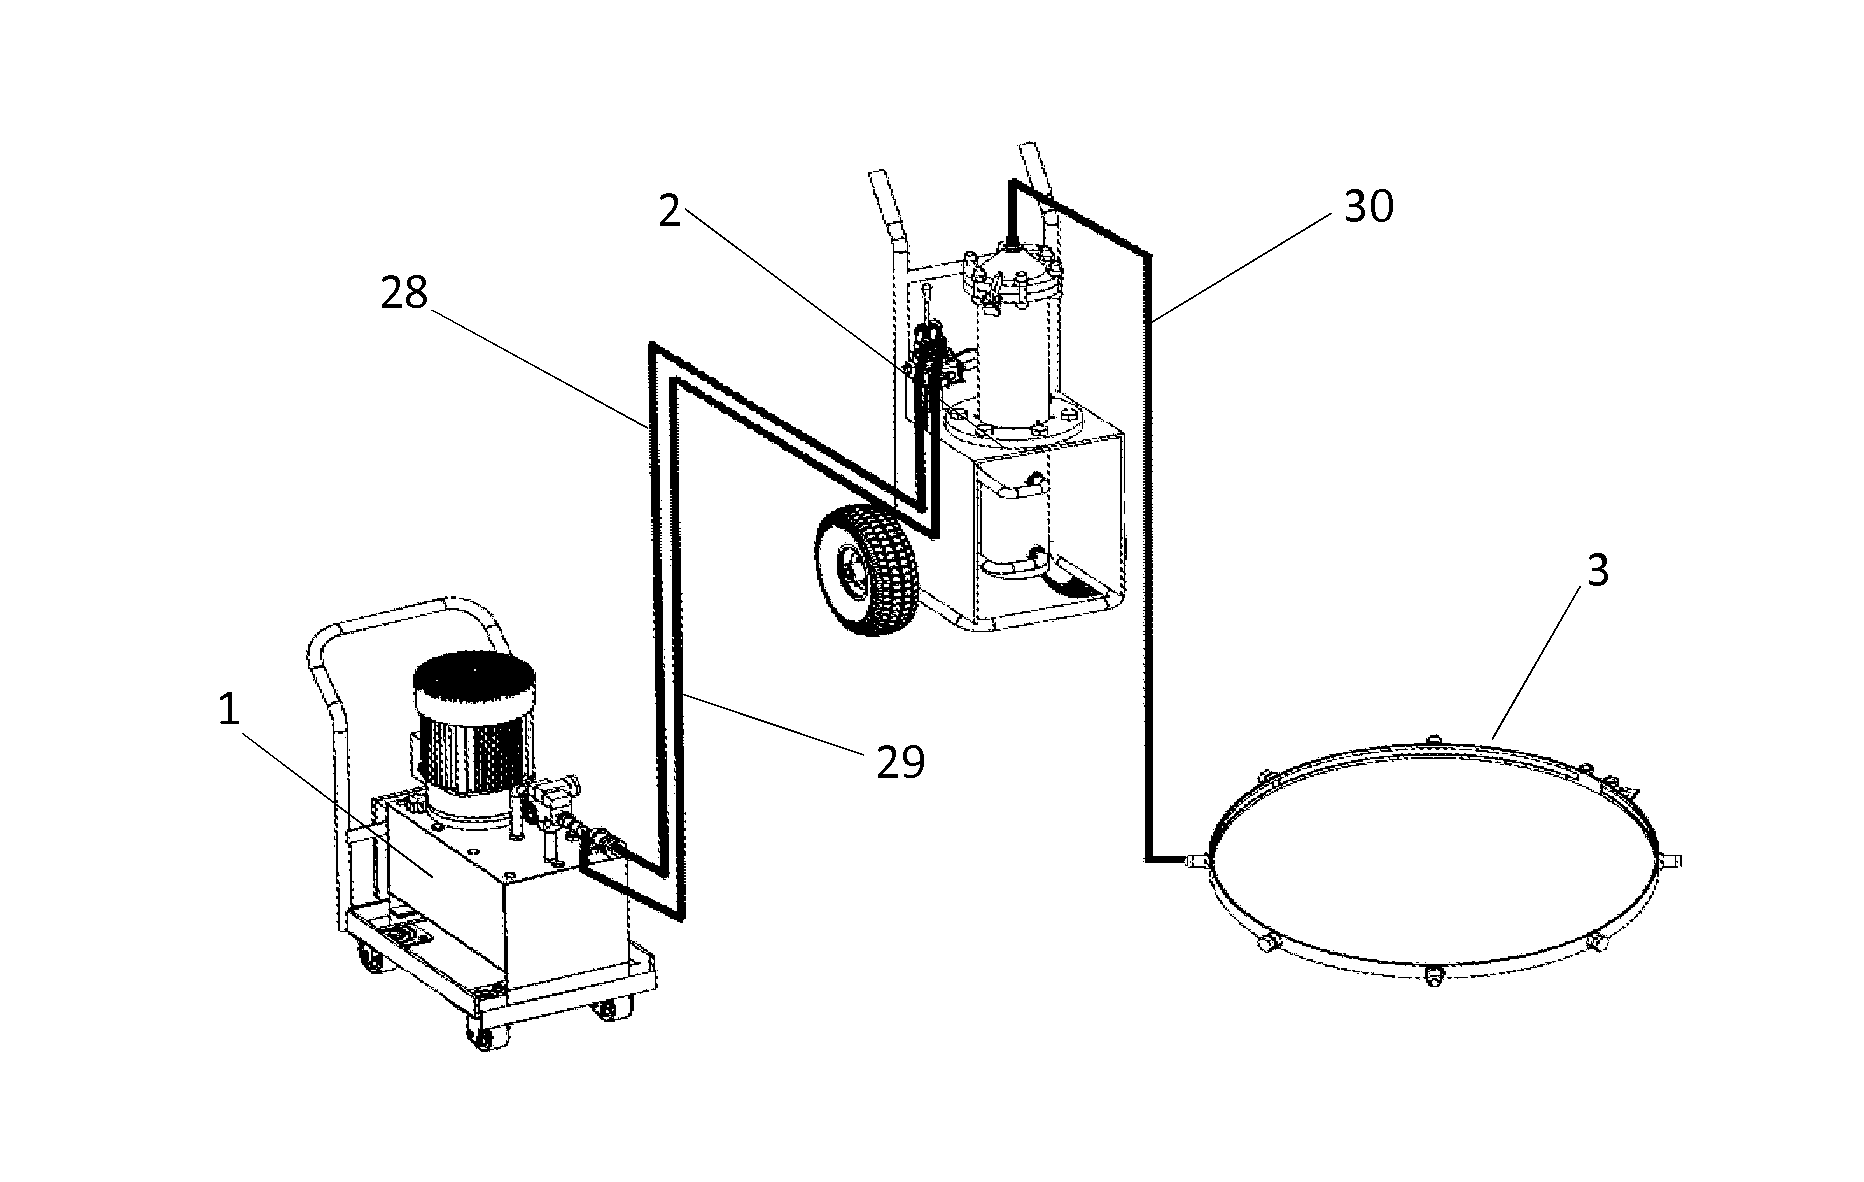 Sealing apparatus for applying corrosion prevention compound in the gap between pipe flanges without using heat